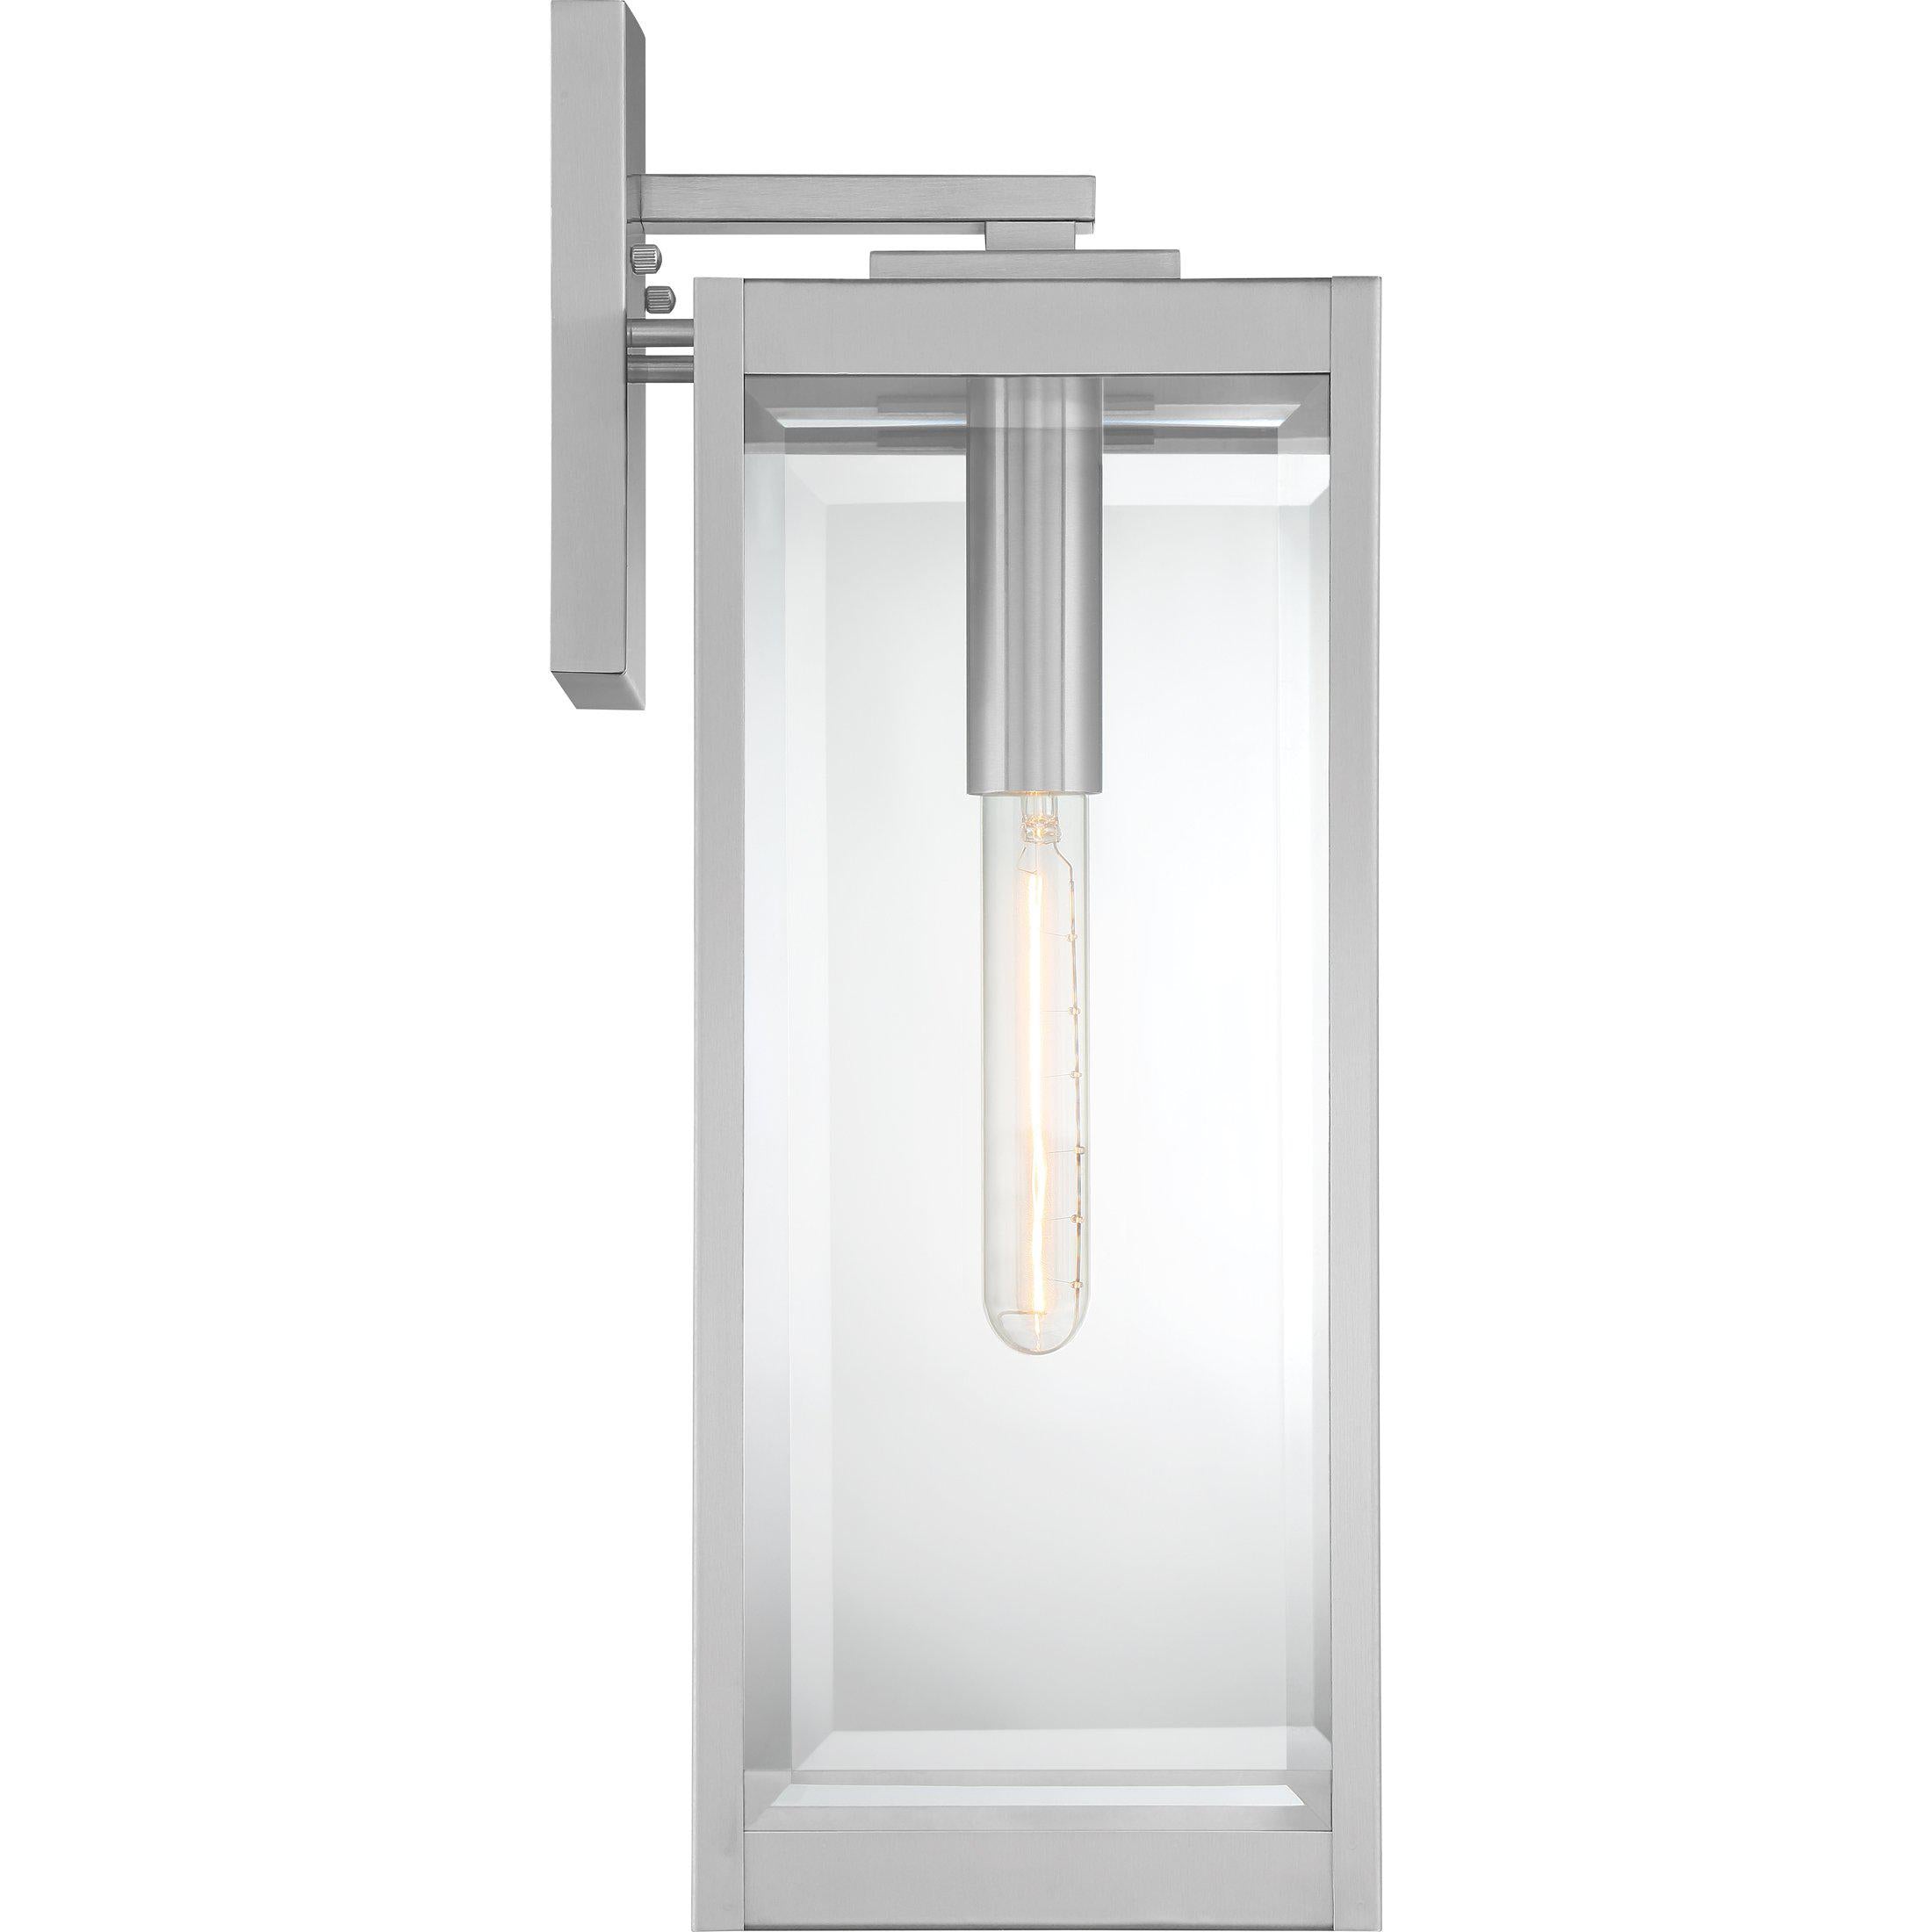 Quoizel Westover Outdoor Lantern, Large | Overstock Outdoor l Wall Quoizel Inc   